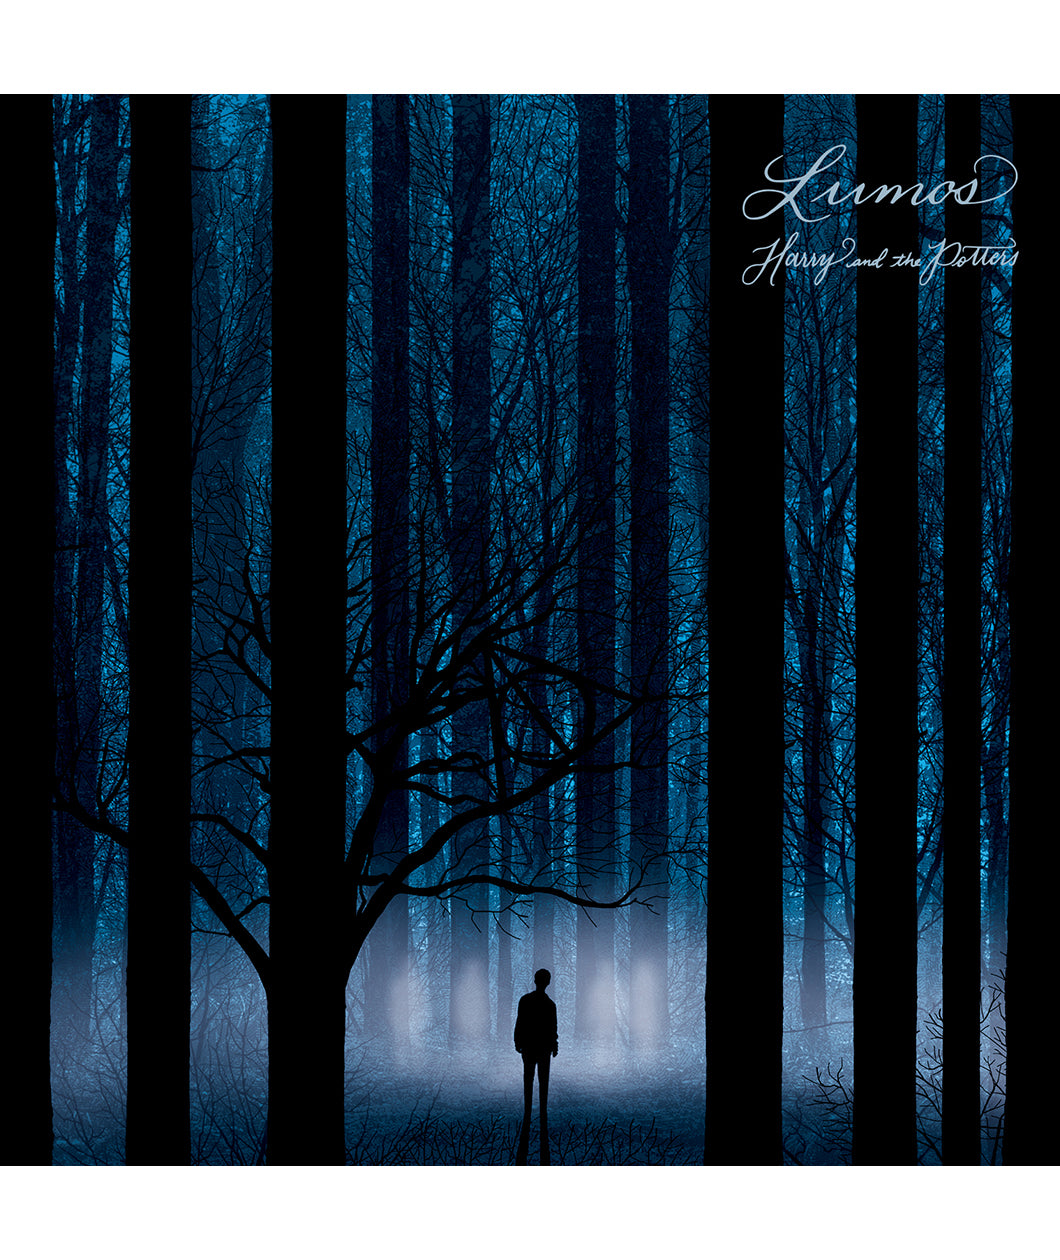 Square album art depicting an ominous forest scene with blue light and black trees, a lone figure standing among them. The text 